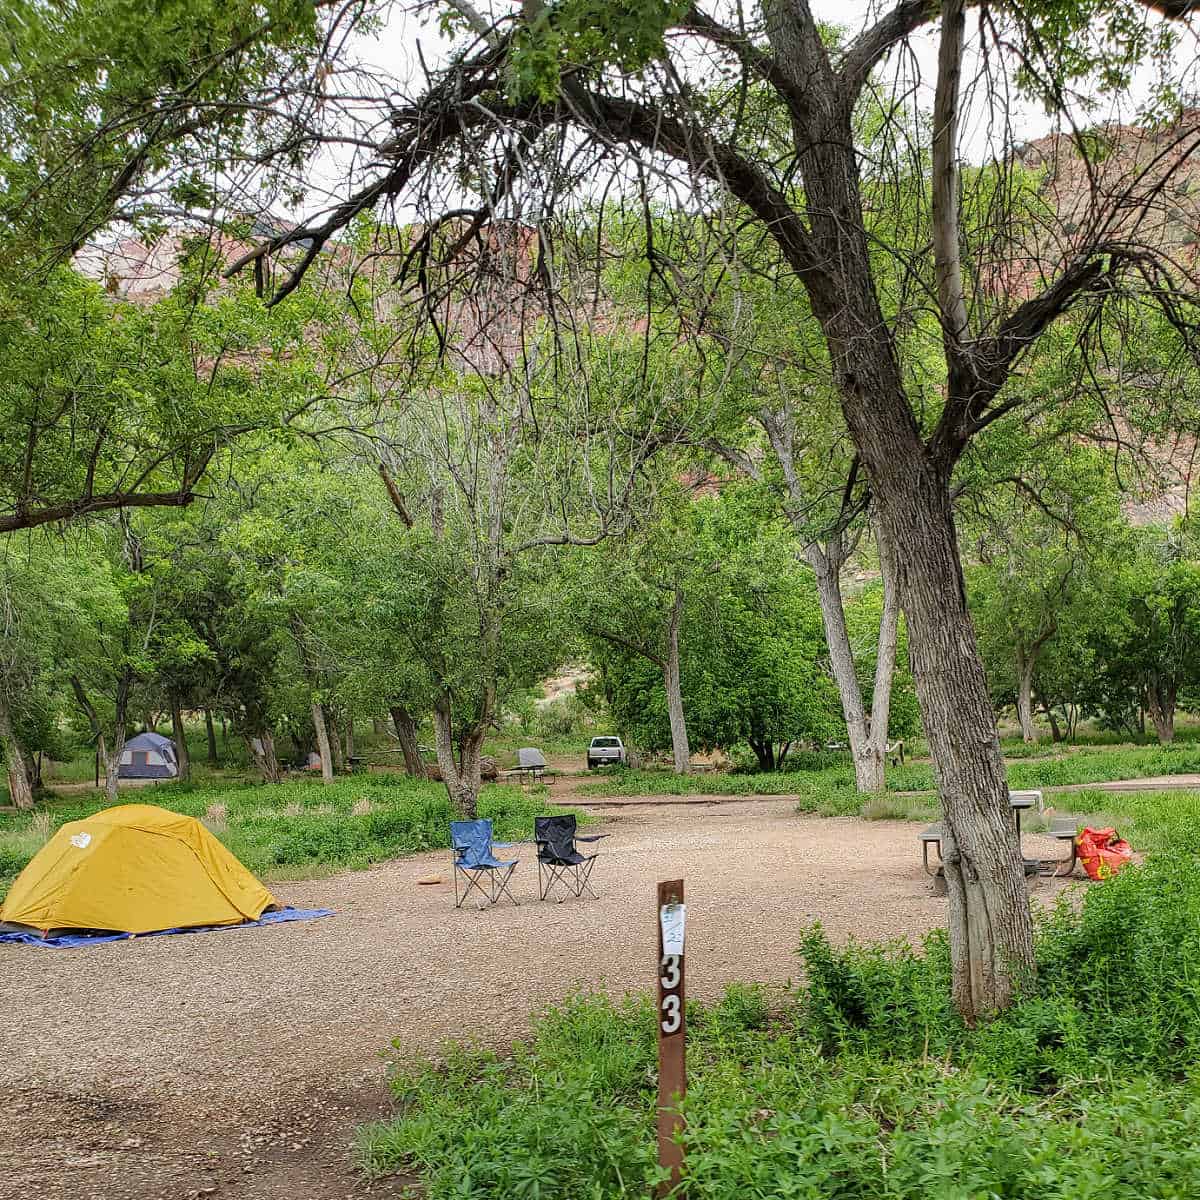 Tents at the South Campground in Zion National Park